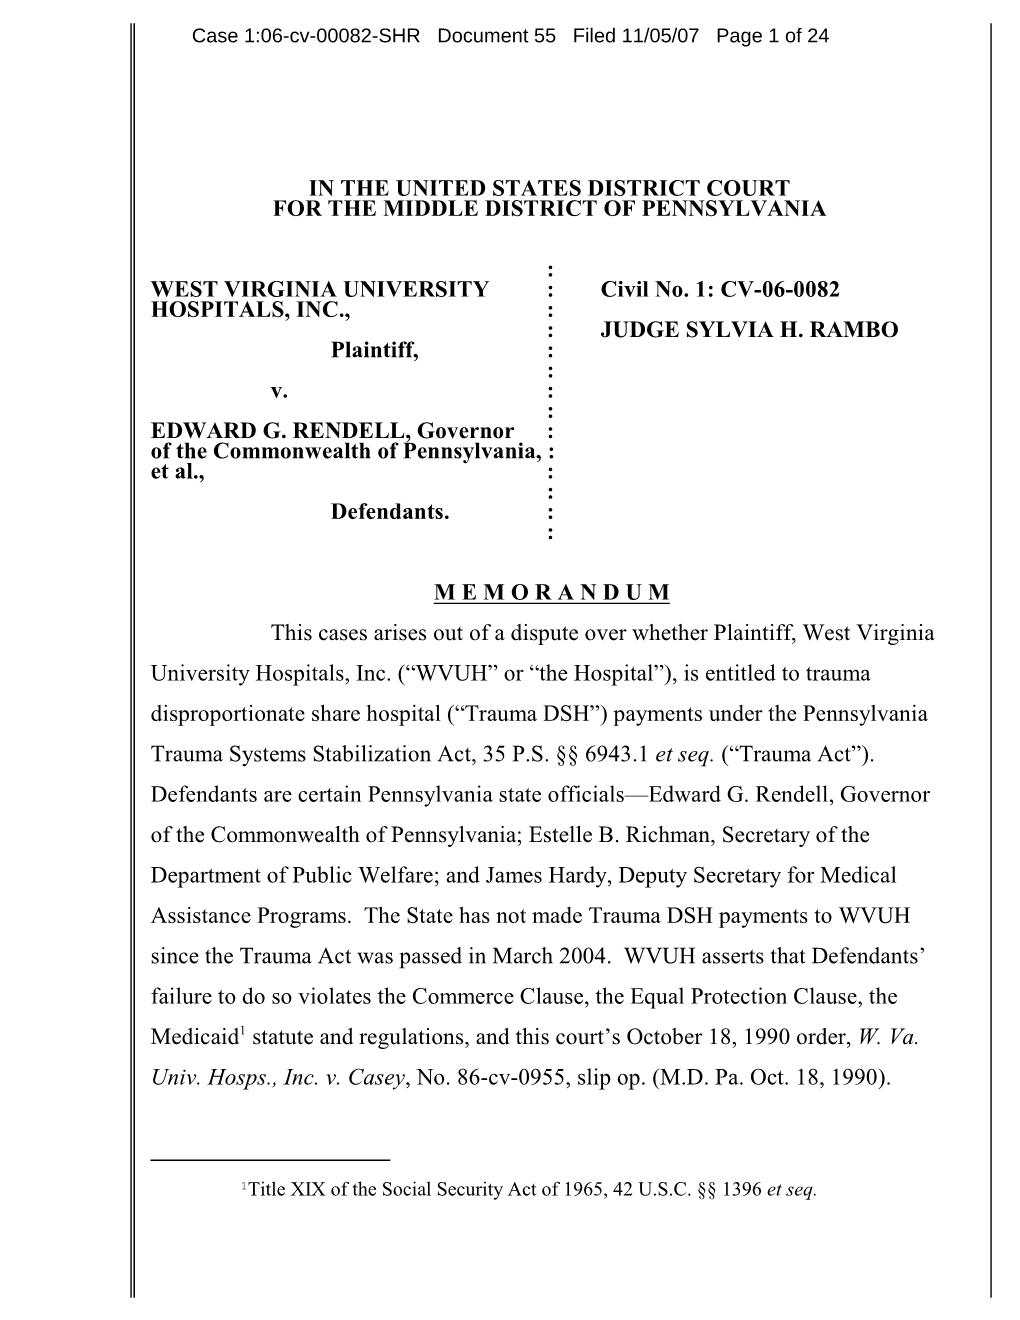 Case 1:06-Cv-00082-SHR Document 55 Filed 11/05/07 Page 1 of 24